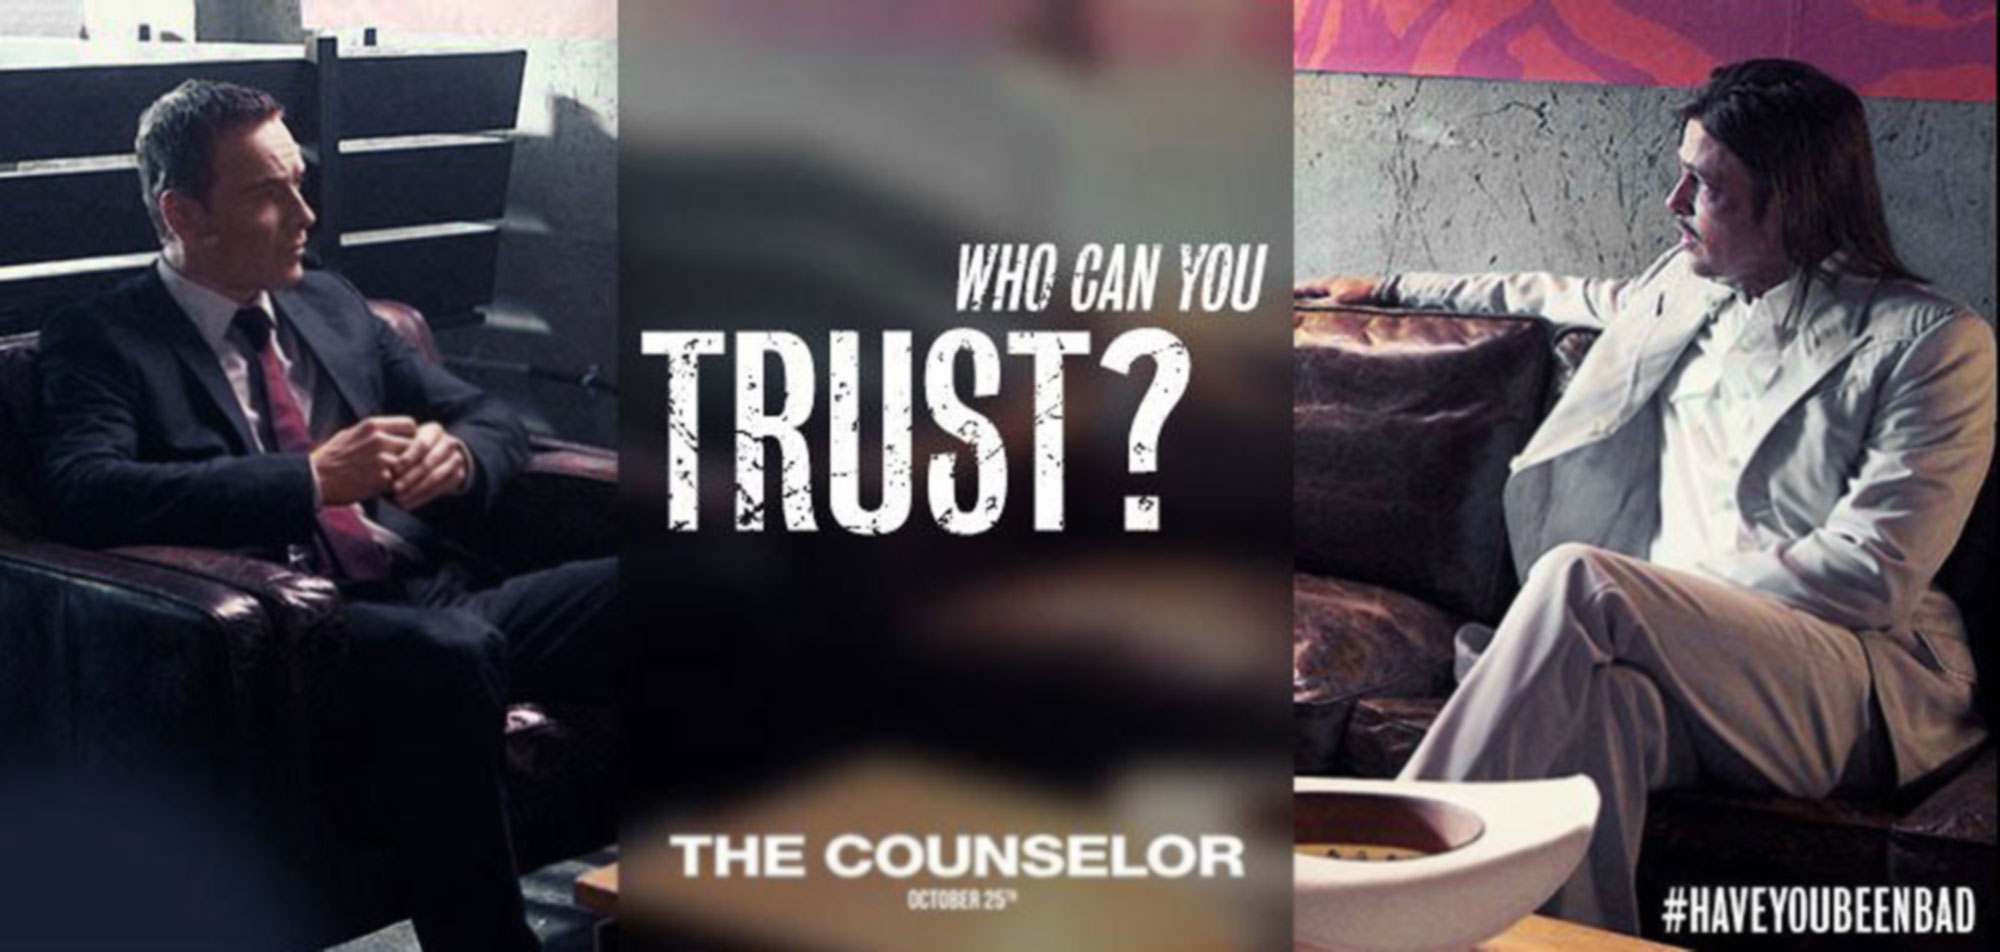 firsntraulercounselor2013